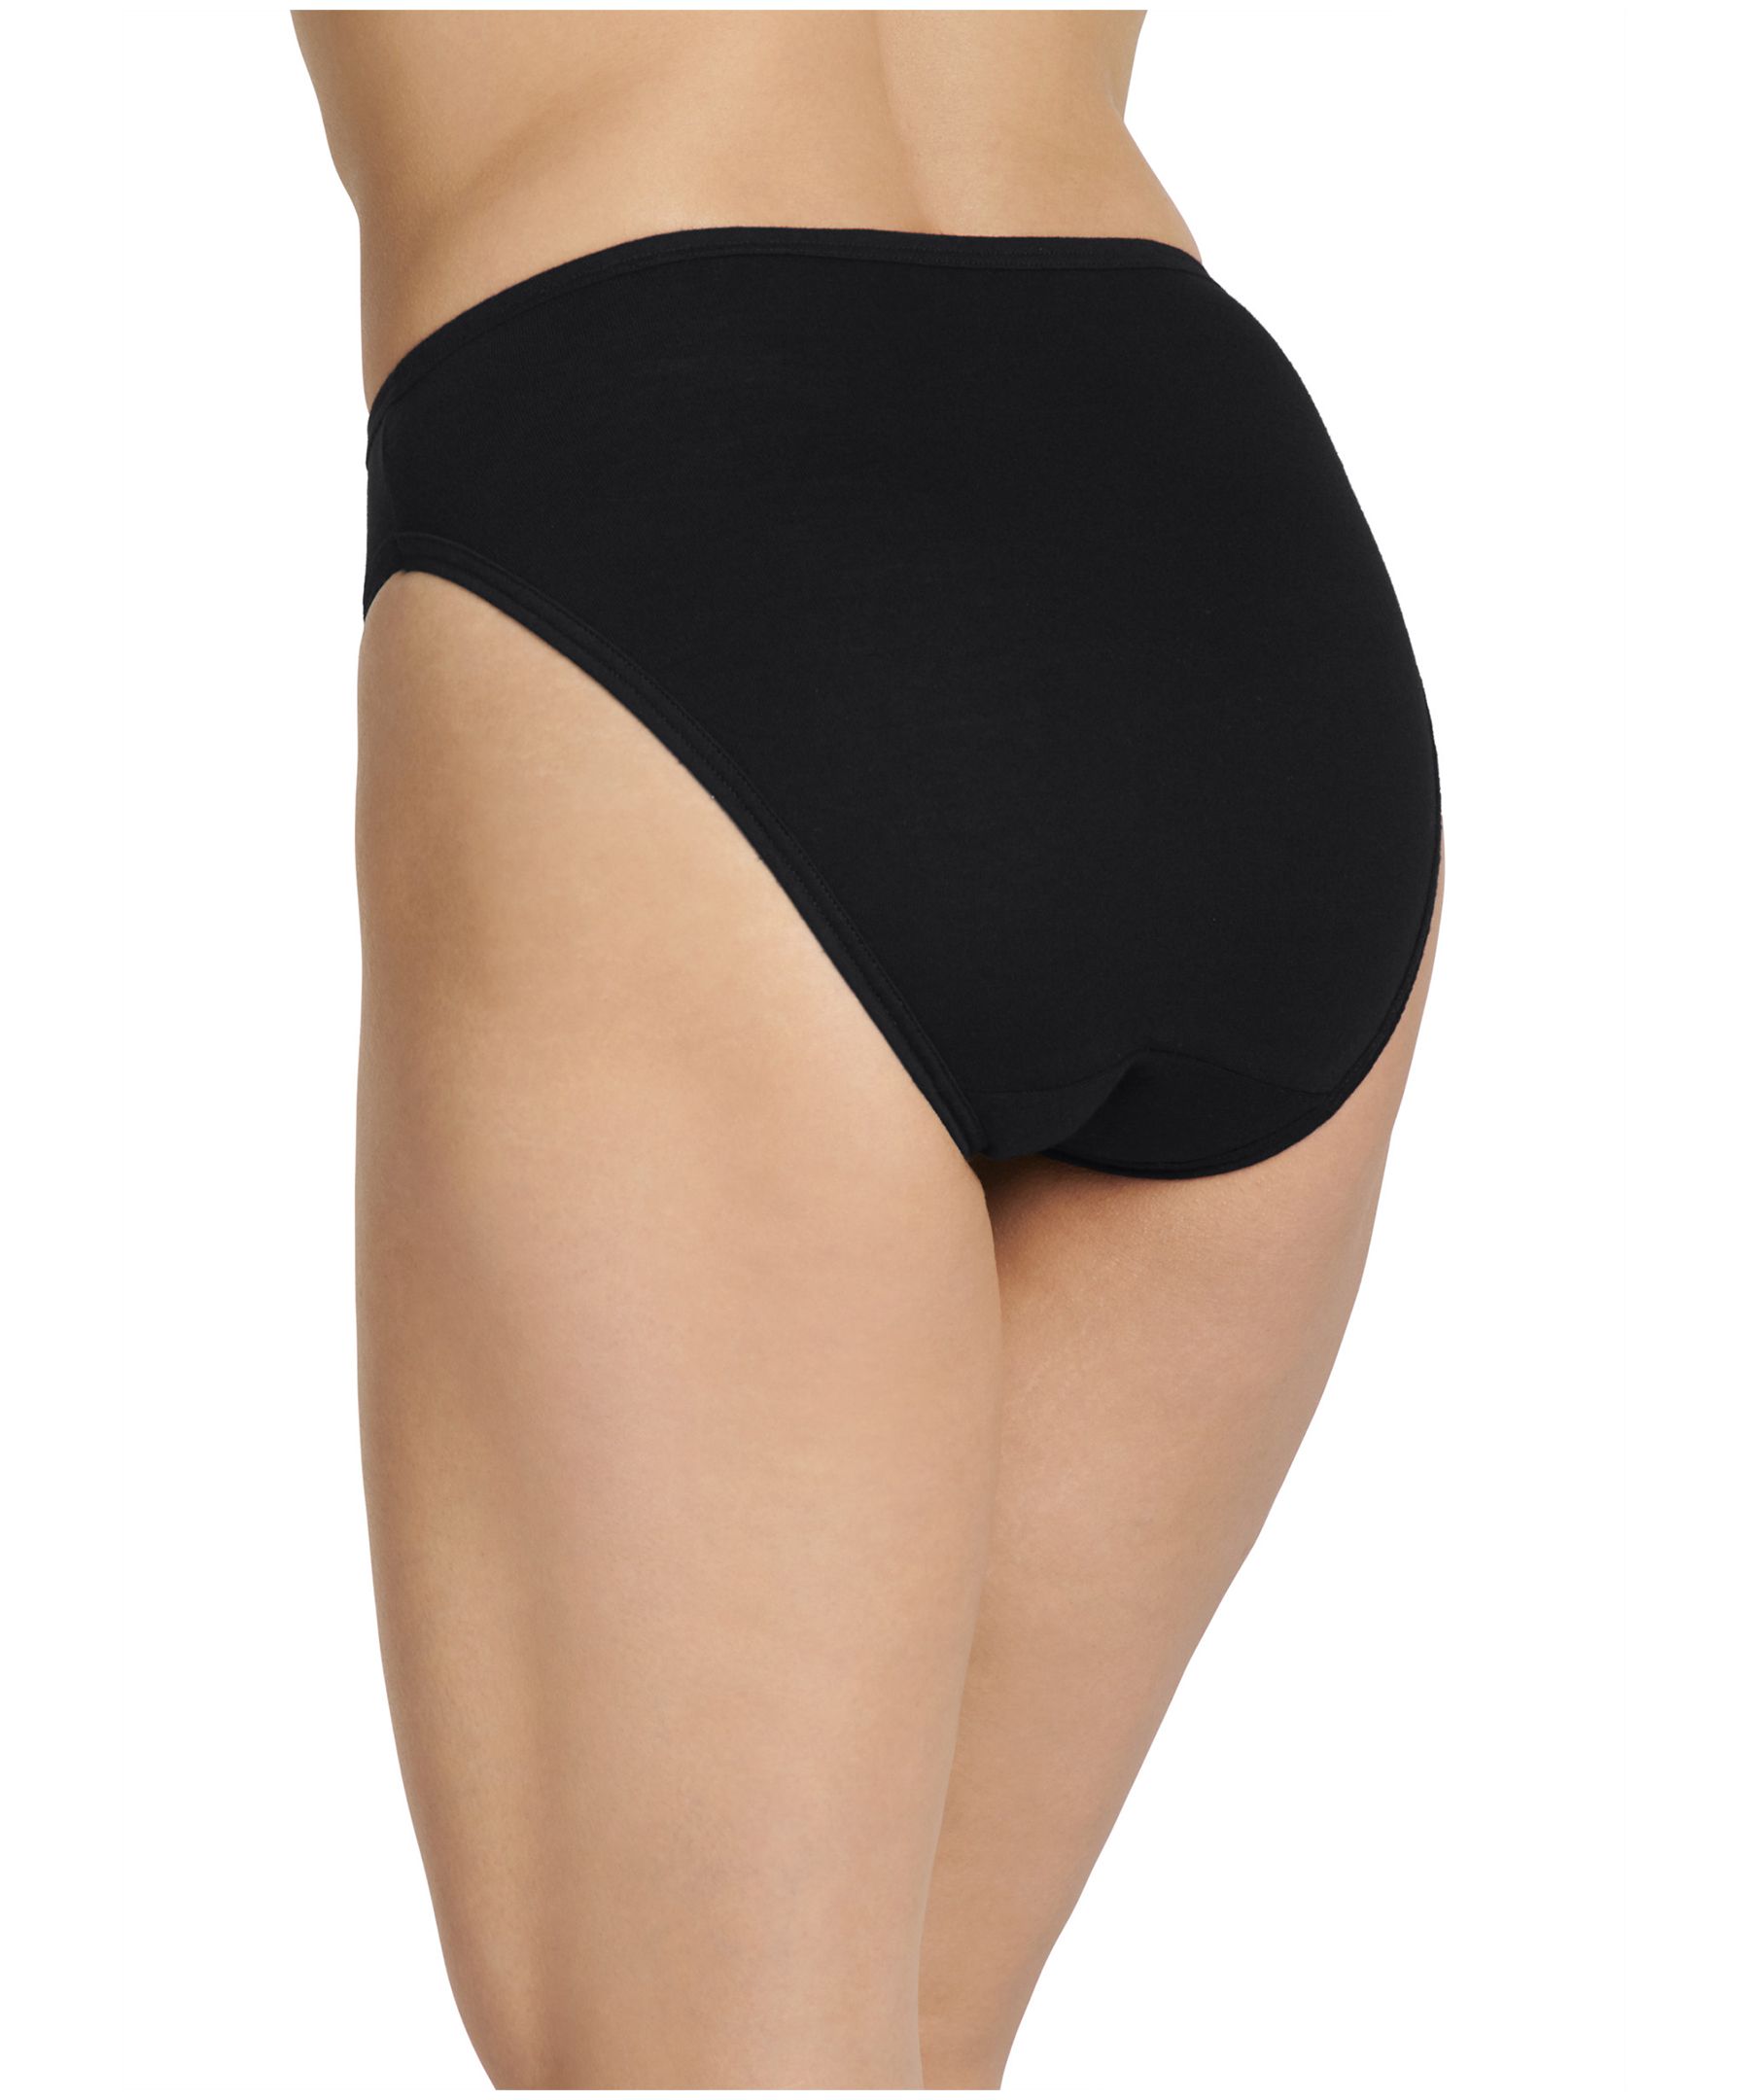 Police Auctions Canada - Women's Jockey Elance French Cut Panties, 3 Pack -  Size 9/XXL (516969L)